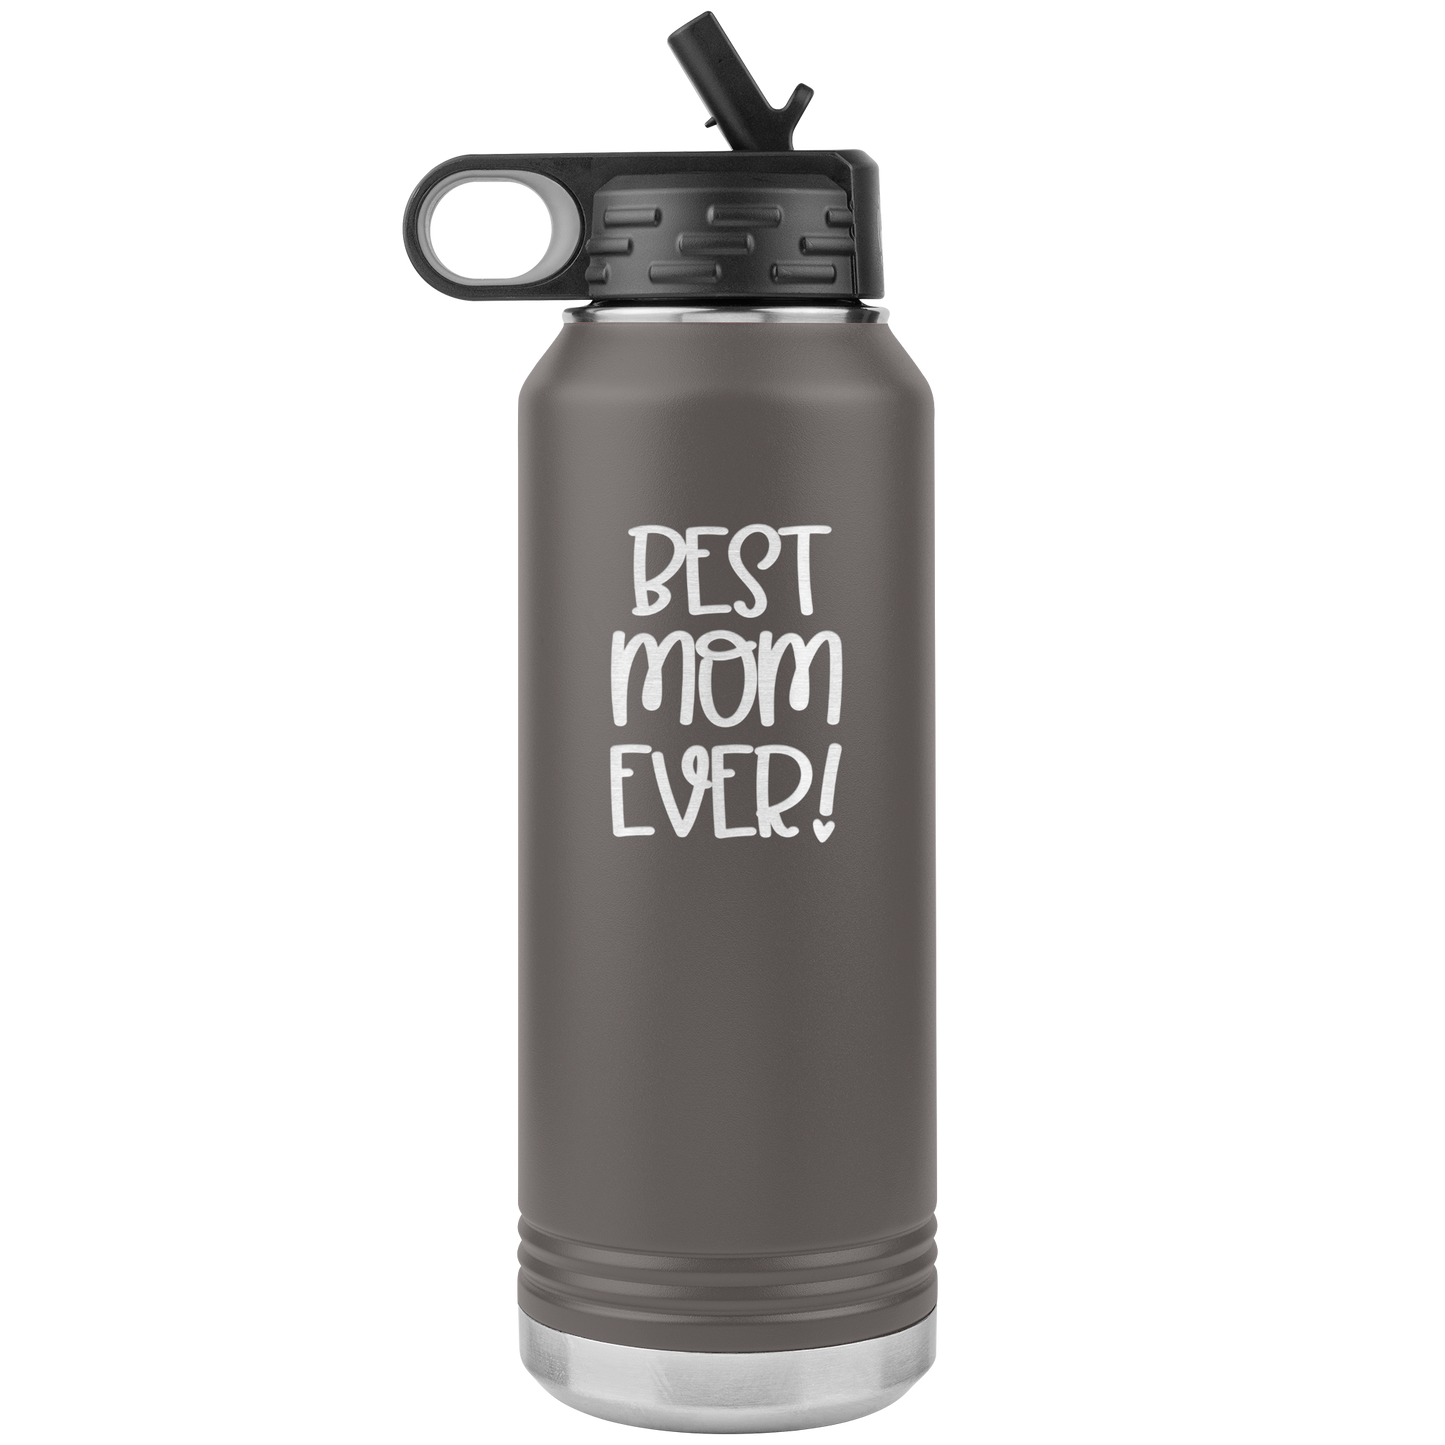 "Best Mom Ever!" 32 oz. Insulated Stainless Steel Water Bottle with Flip Top Lid & Built-in Straw